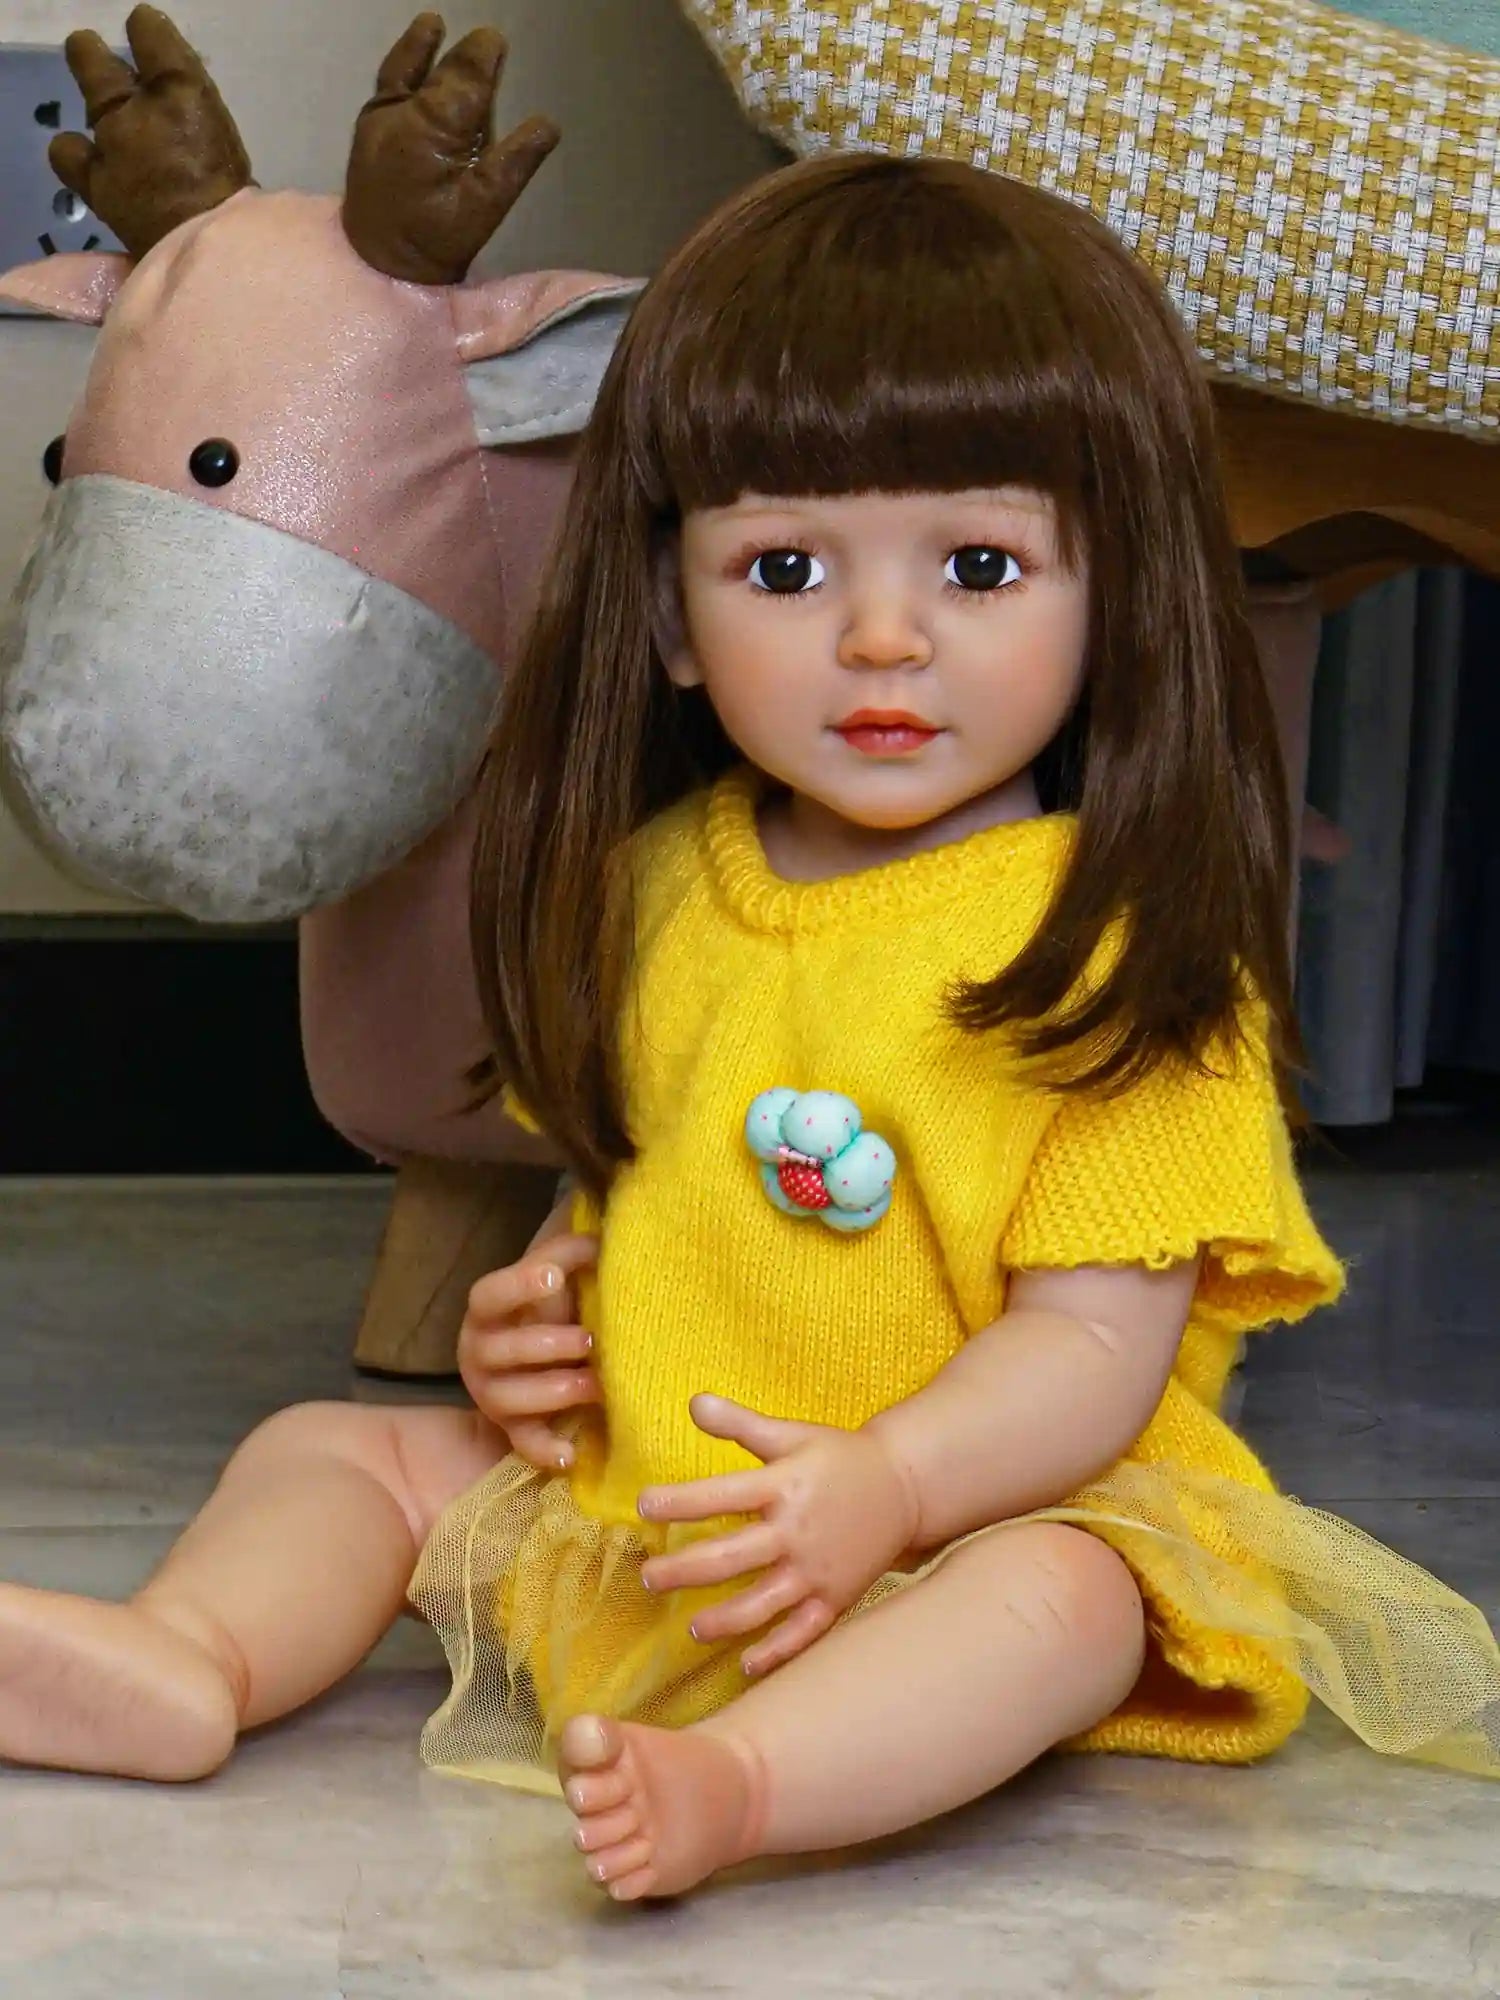 Artisanal doll with a serene countenance and soft brown hair, attired in a knit yellow garment with a flouncy skirt, in a cozy indoor setting with plush toys and decorative pillows.